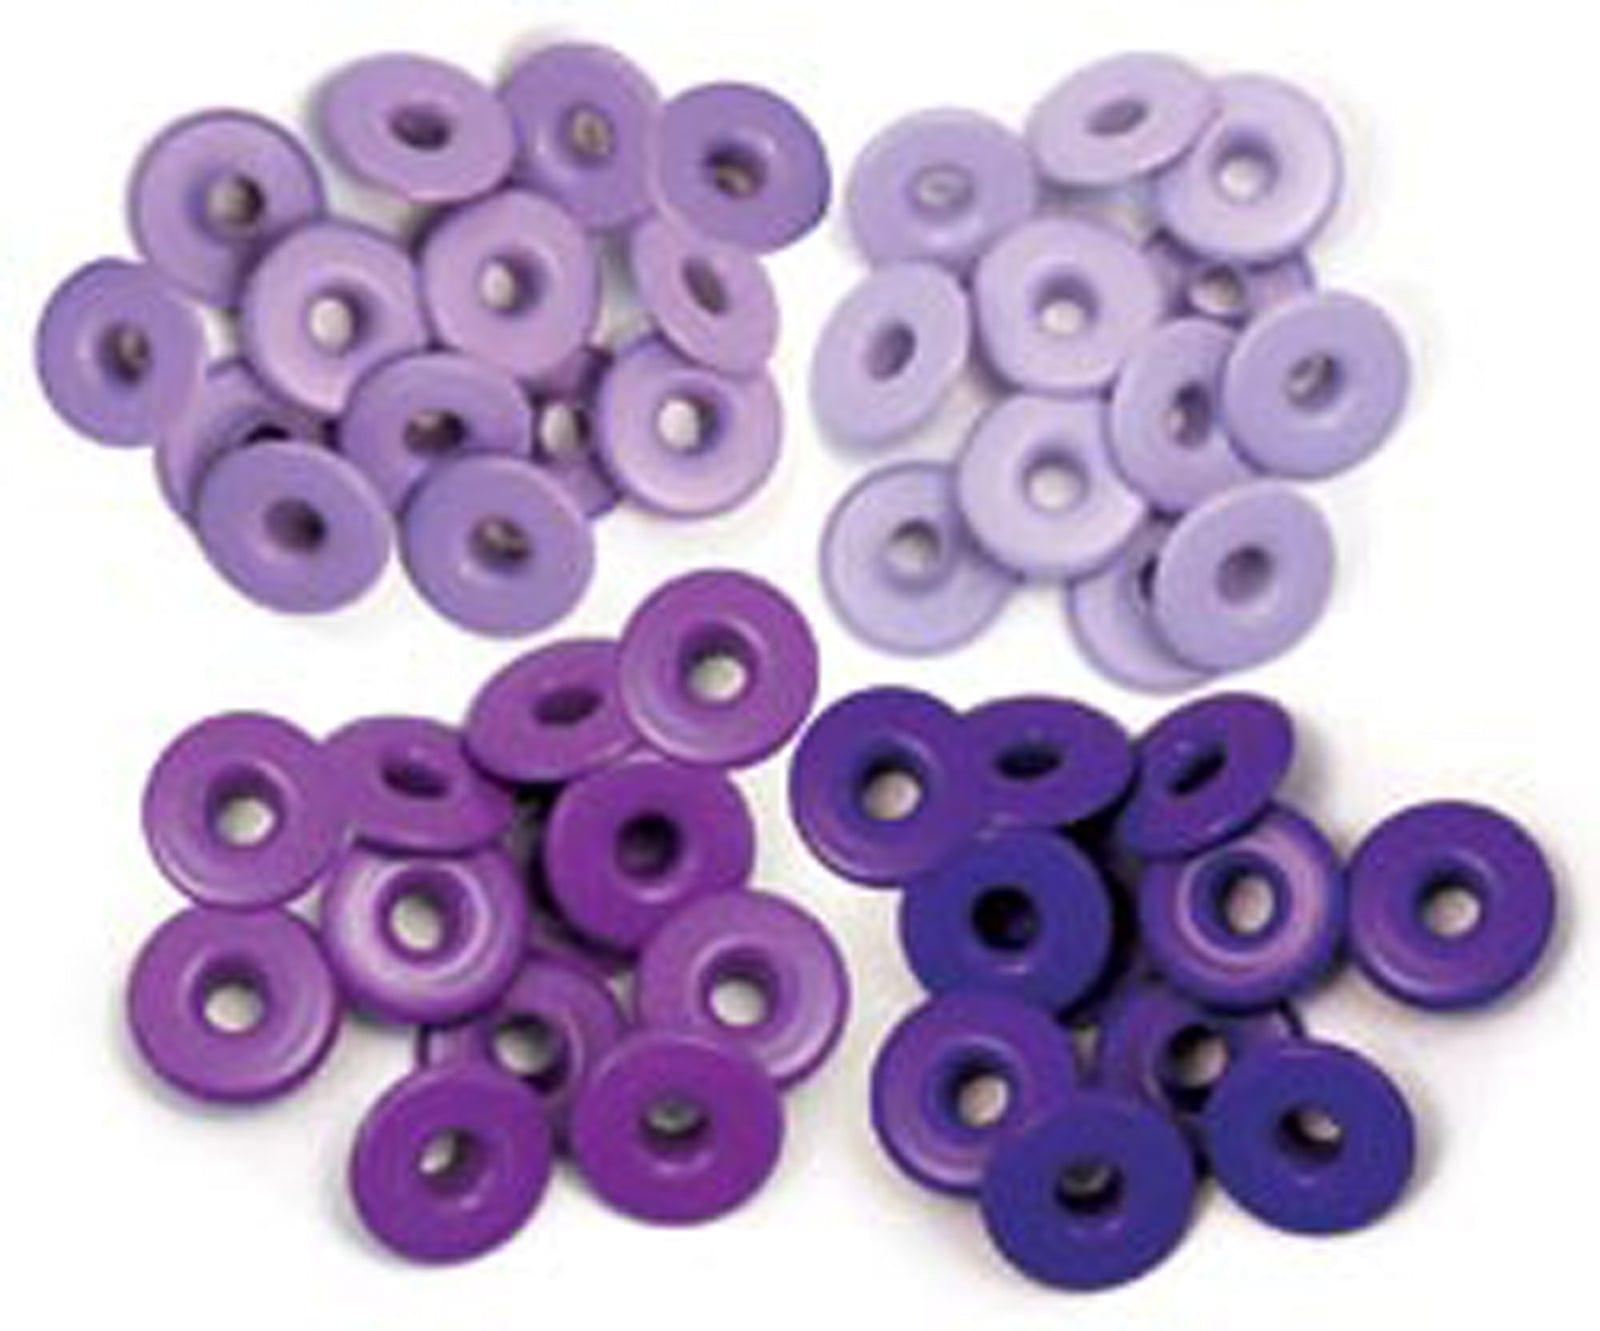 Wide Eyelets Collection Hues of Purple .1875" Scrapbook Eyelets by We R Memory Keepers - 40 Pieces (10 of each color) - Scrapbook Supply Companies